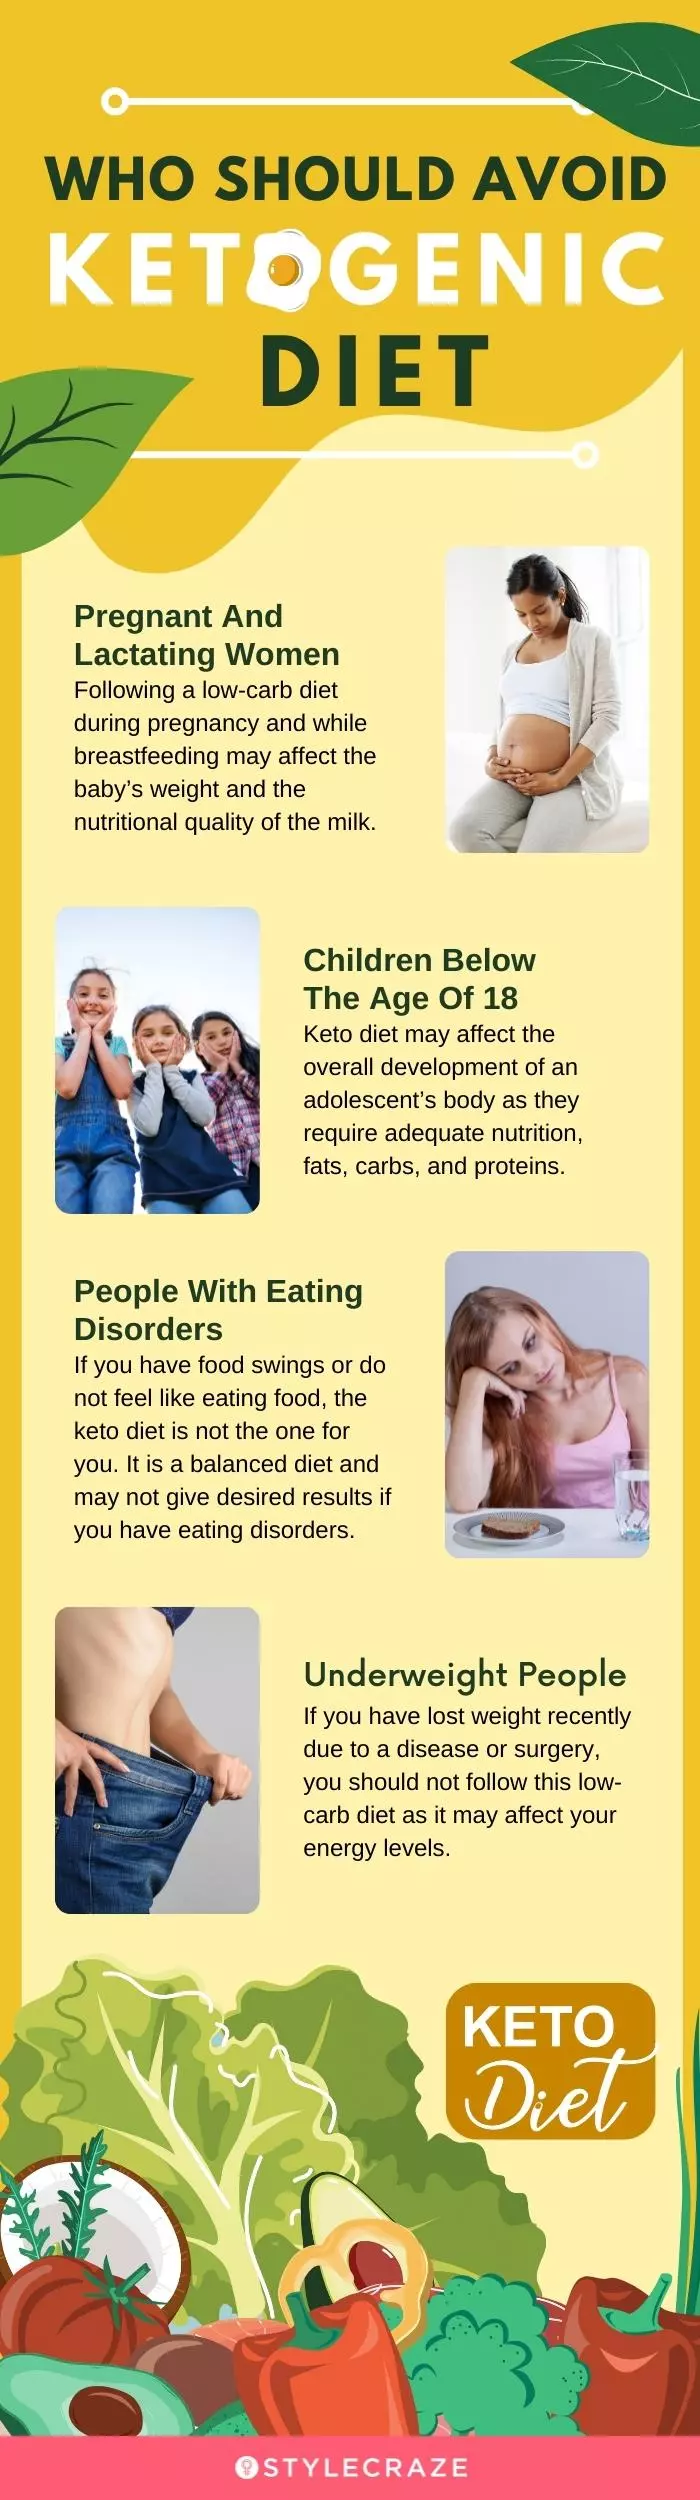 who should avoid ketogenic diet (infographic)